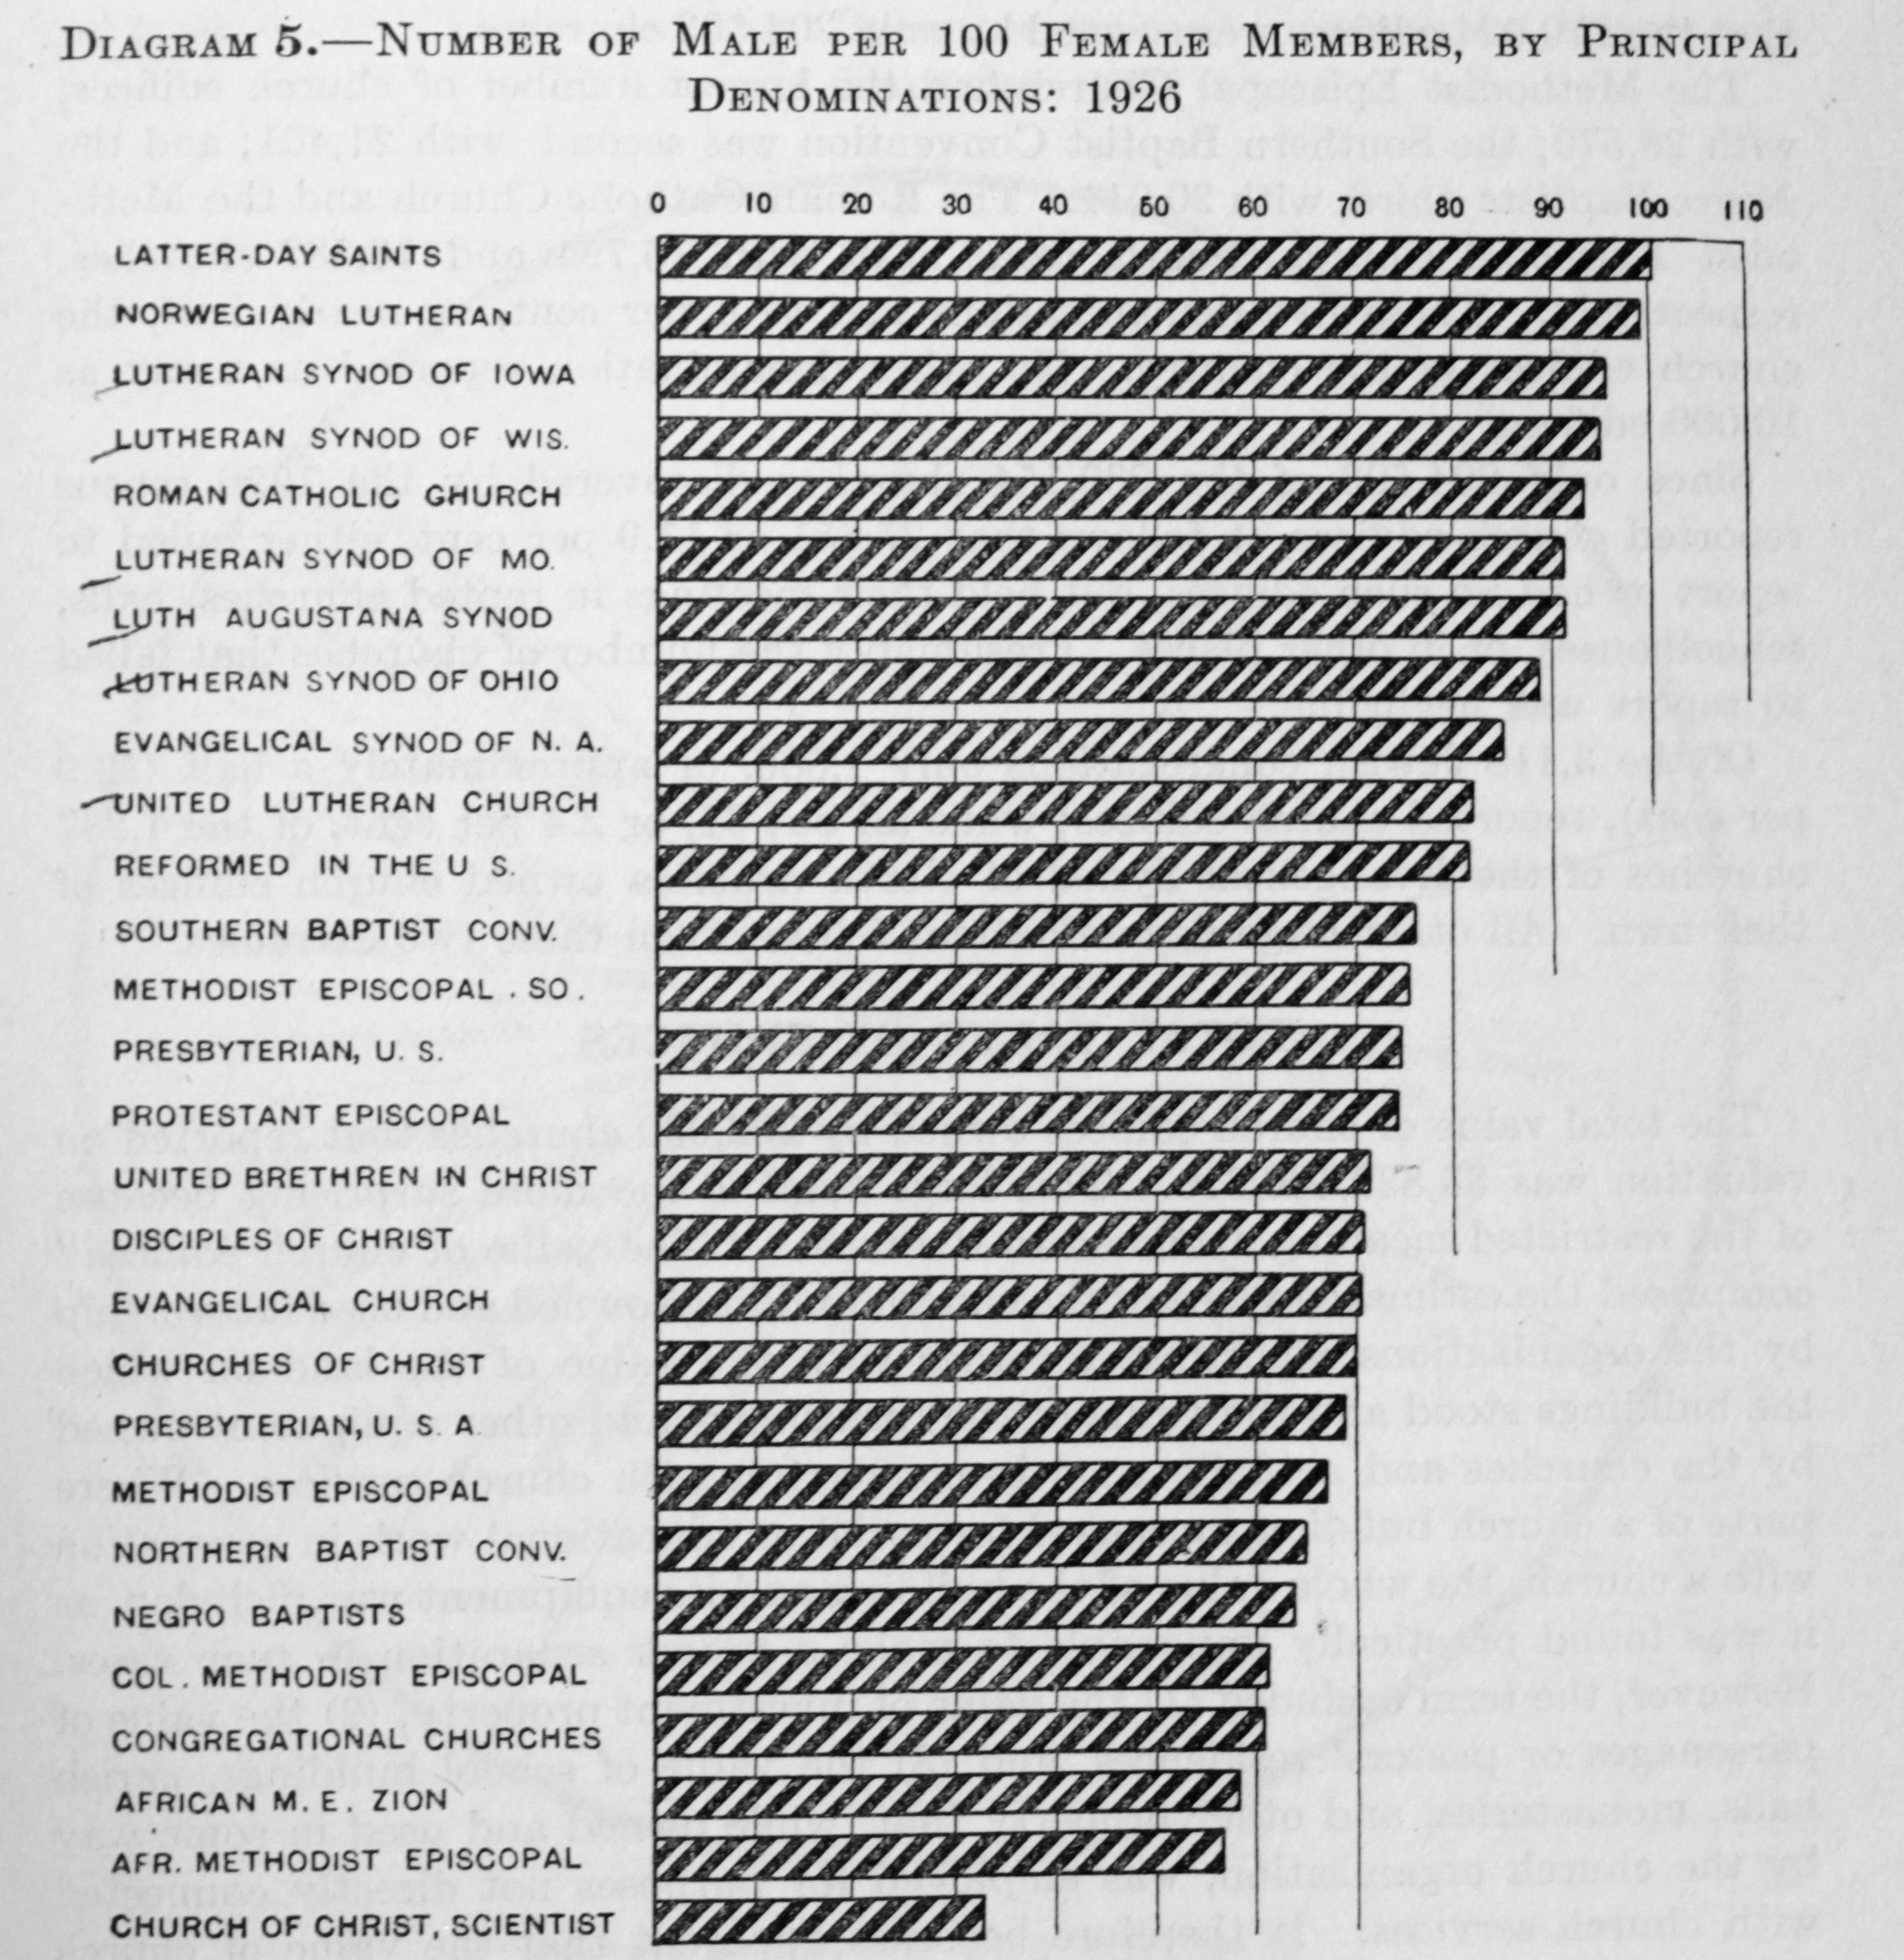 Figure 2. A visualization of the ratio of women to men in denominaitons created by the Census Bureau.